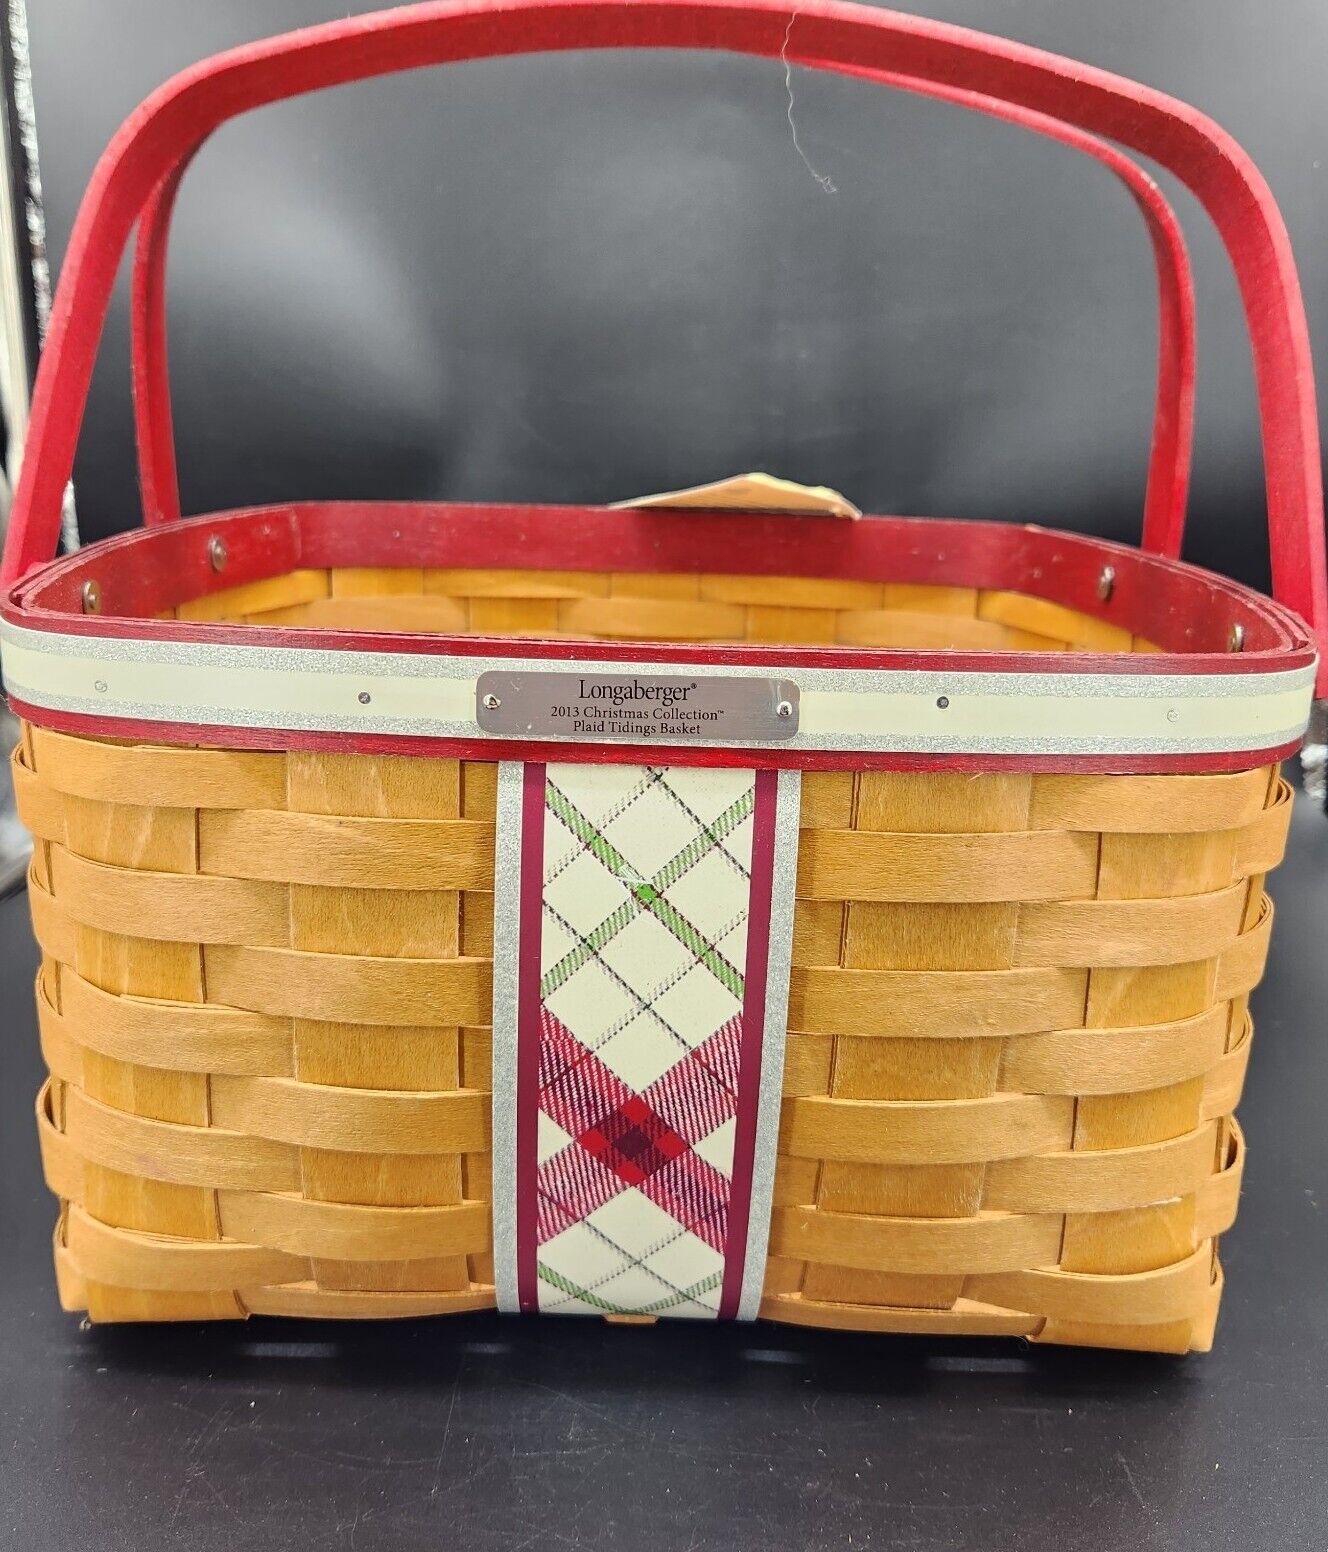 Longaberger 2013 Christmas Collection Red Plaid Tidings Basket Red Handles GIFT